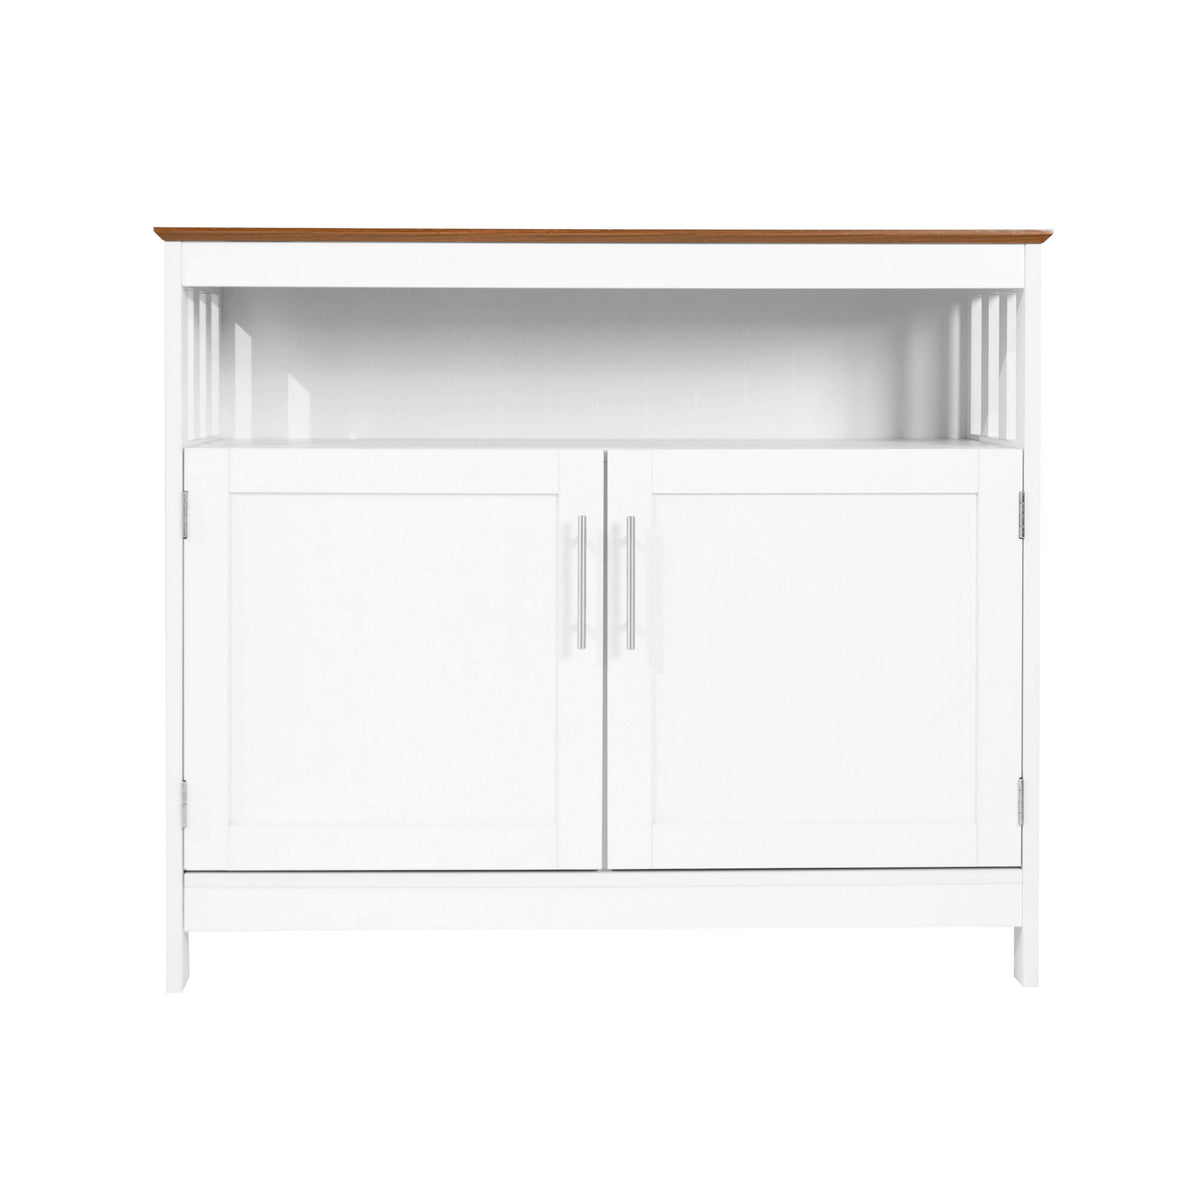 Walnut Top/White Frame |#| Classic Sideboard and Buffet Cabinet with Open and Closed Storage - White/Walnut